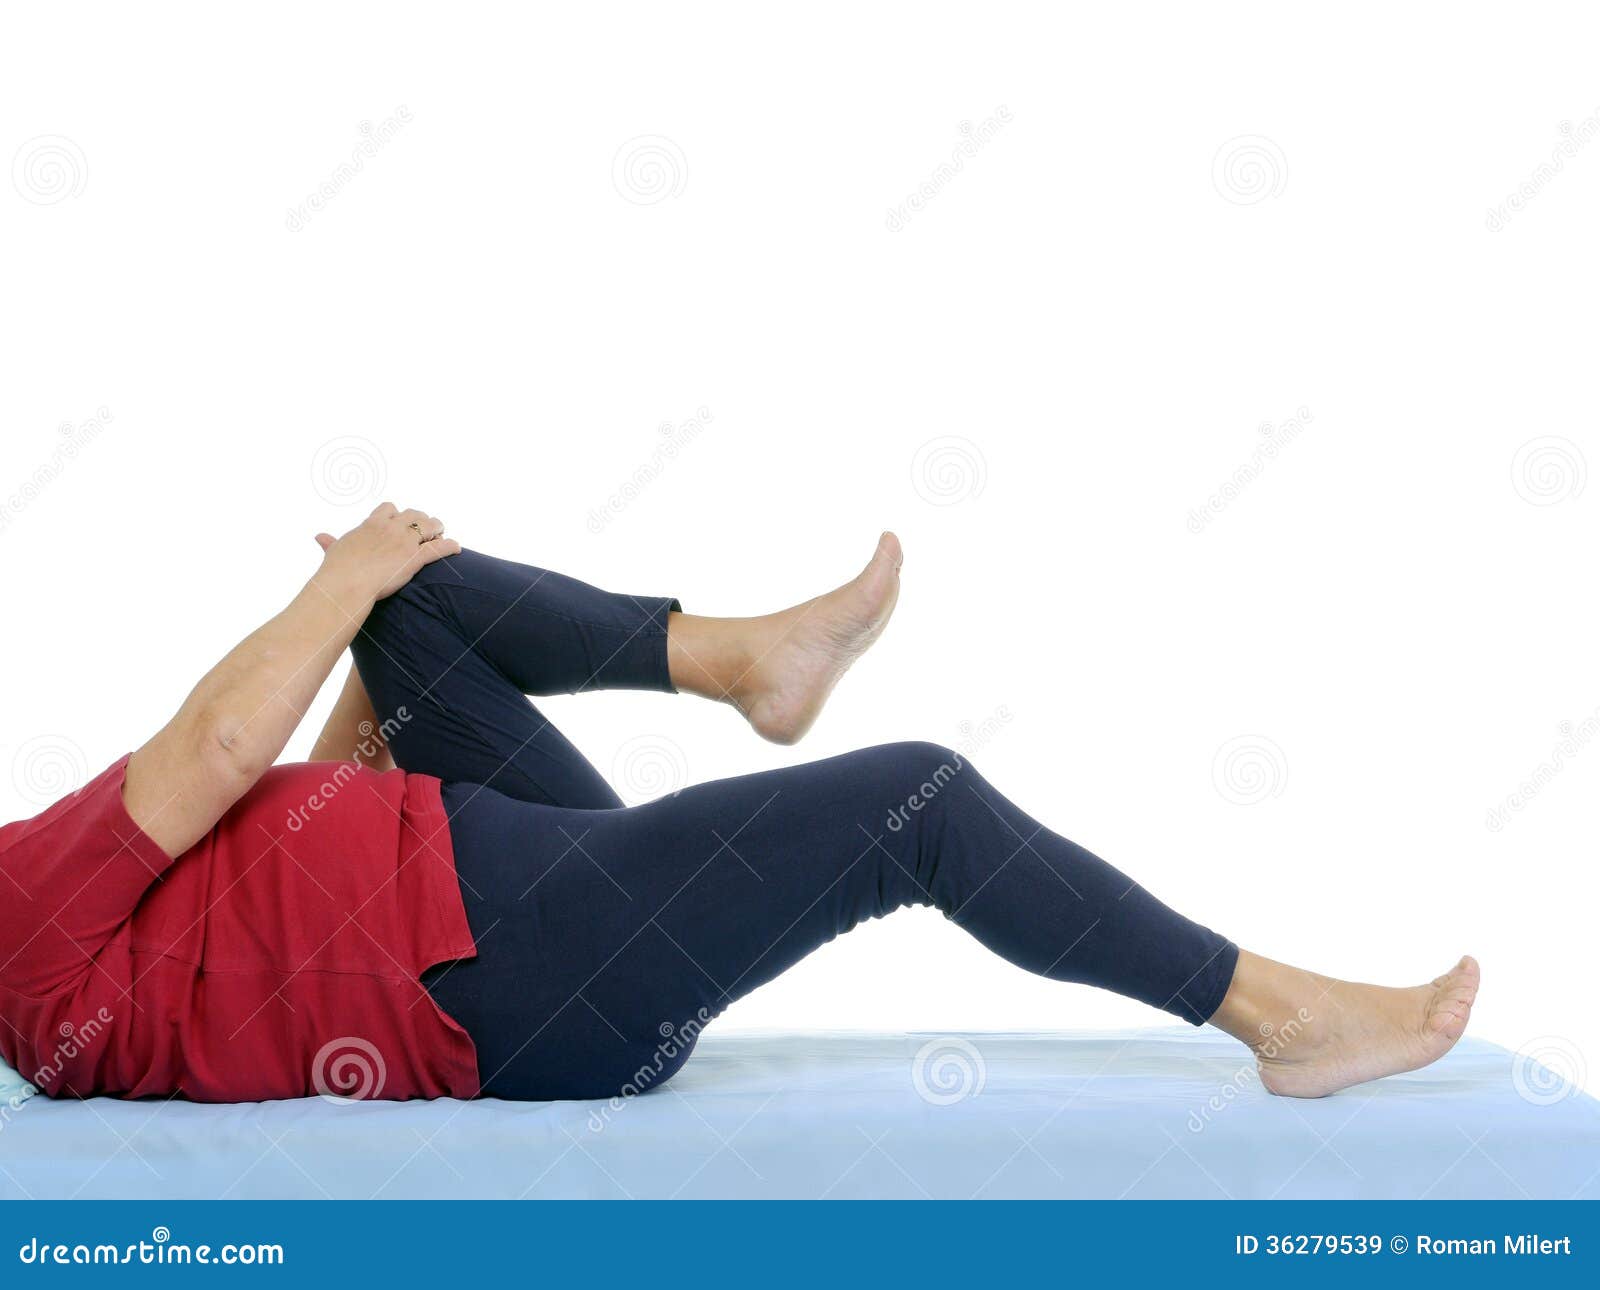 functional test of hip joint contraction